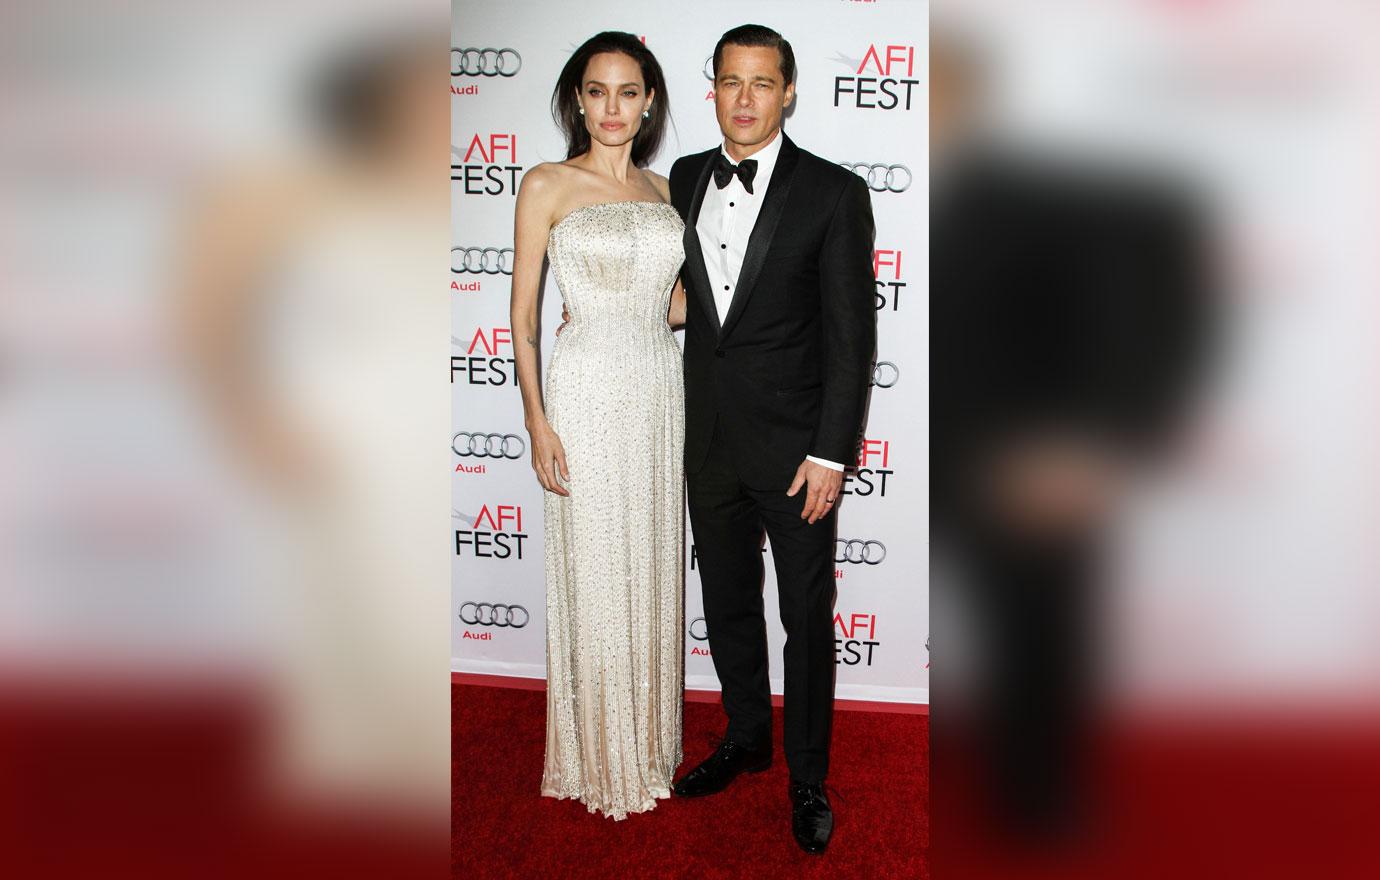 brad pitt convinced angelina jolie is drawing out custody battle until kids are of age #3